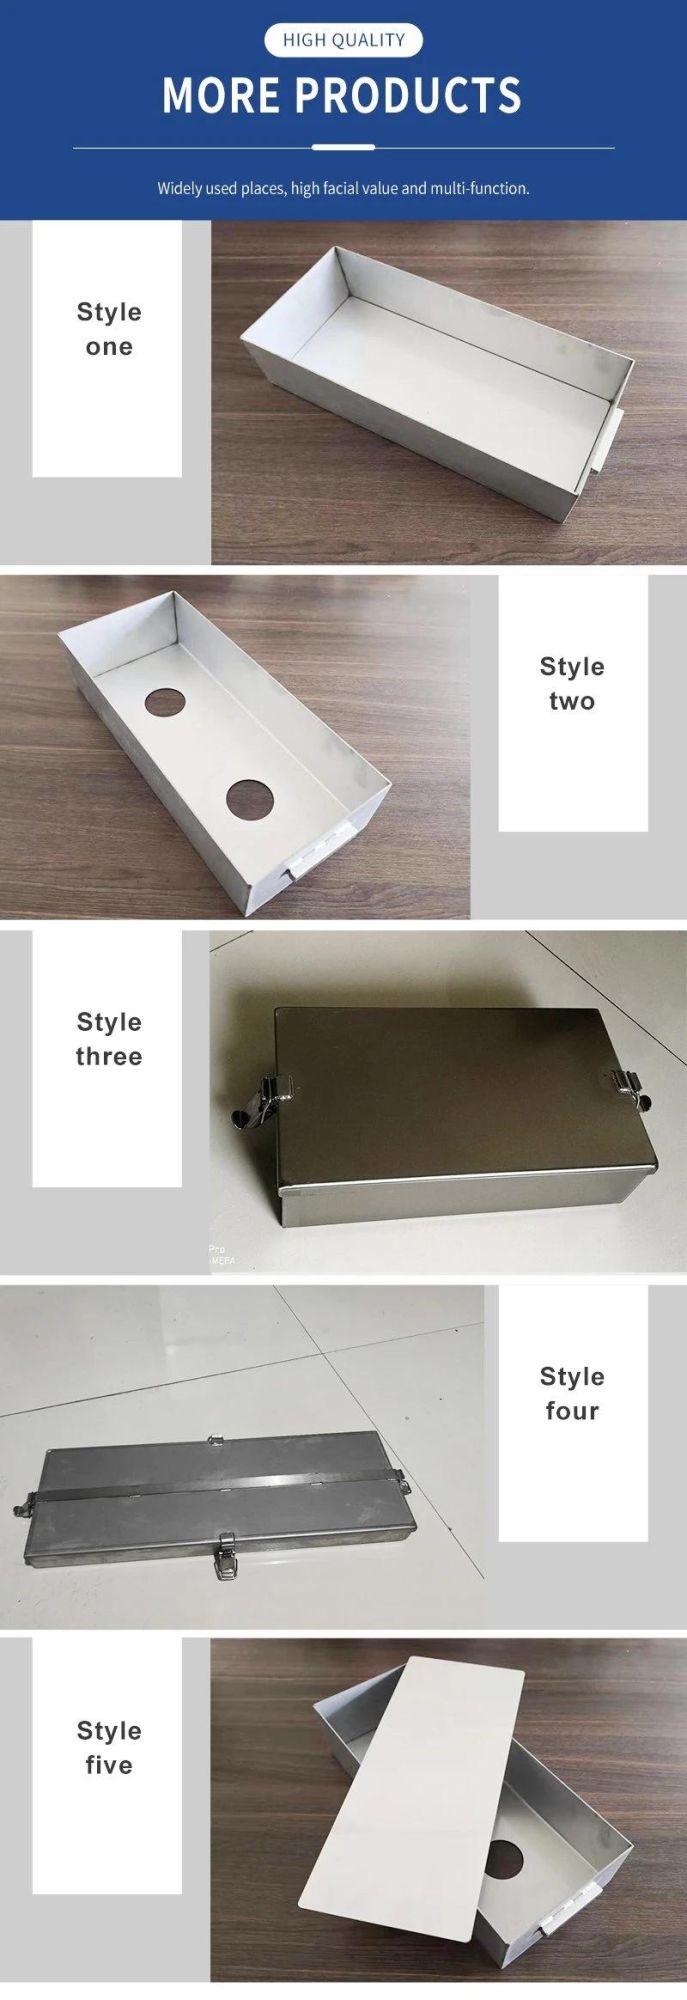 High Density Silicone Box Mold China Big Manufacture Good Price